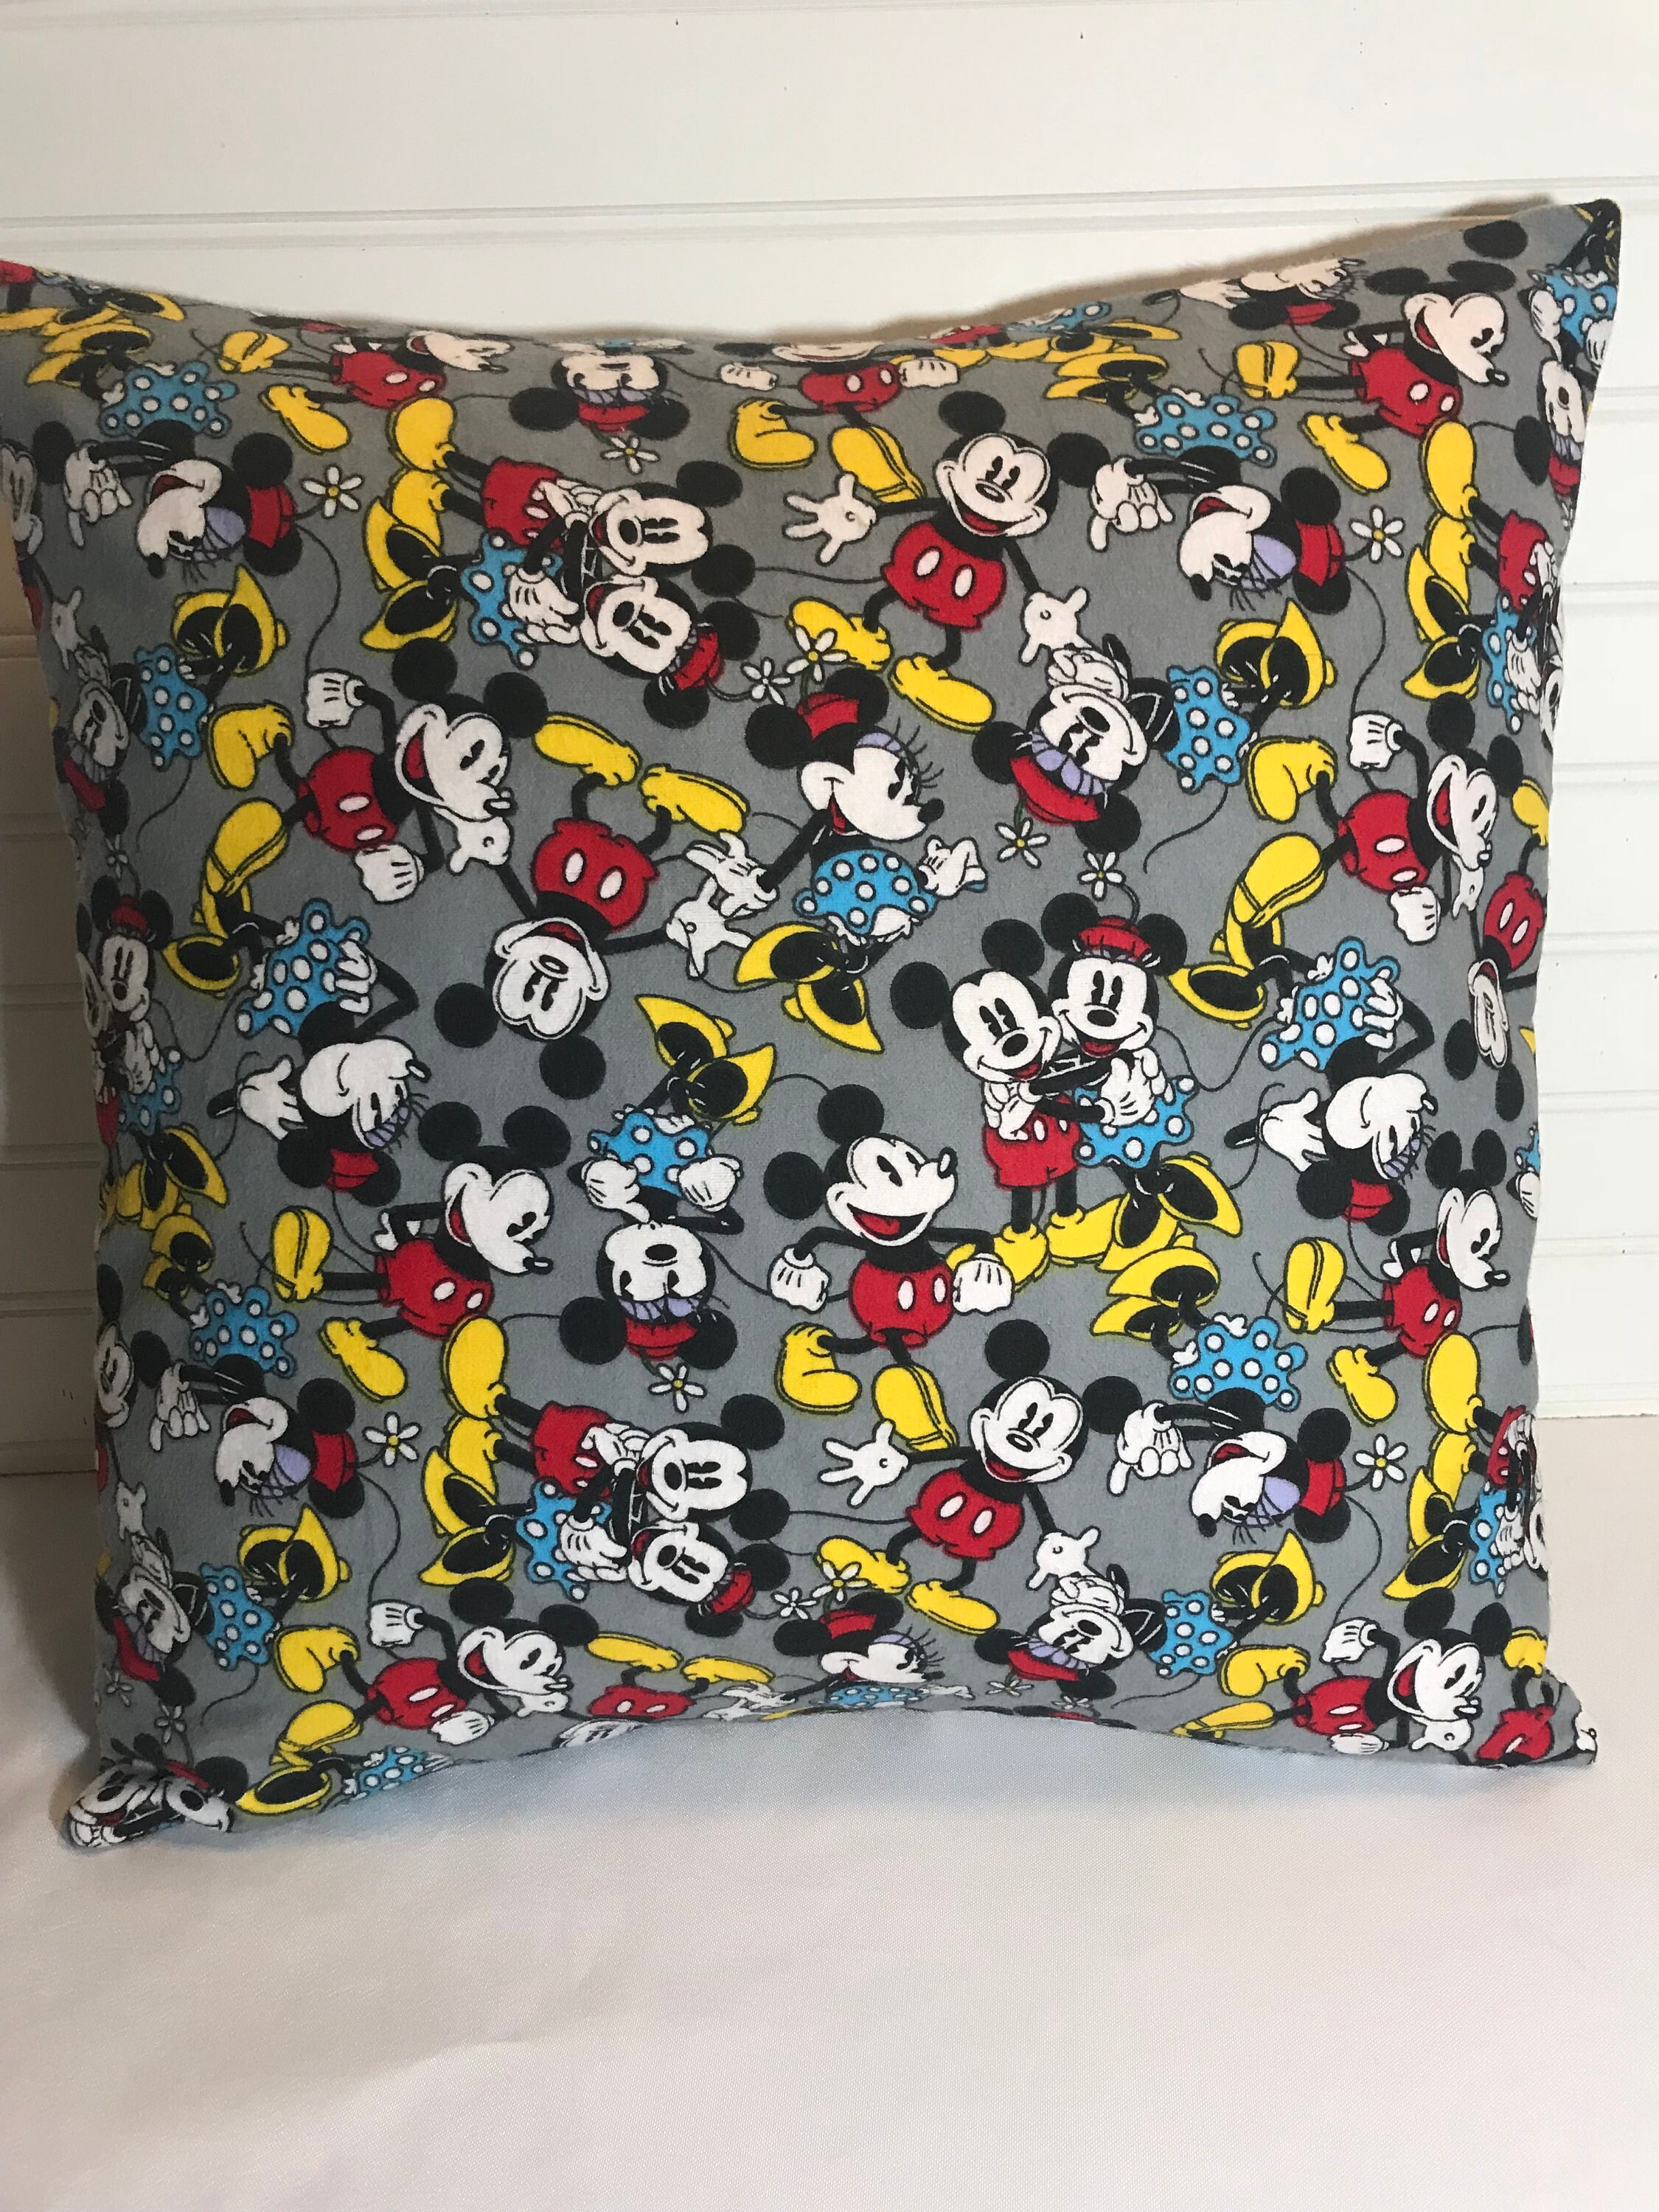 Disney Vintage Mickey Mouse Christmas Holiday Throw Pillow Cover 18” x 18”